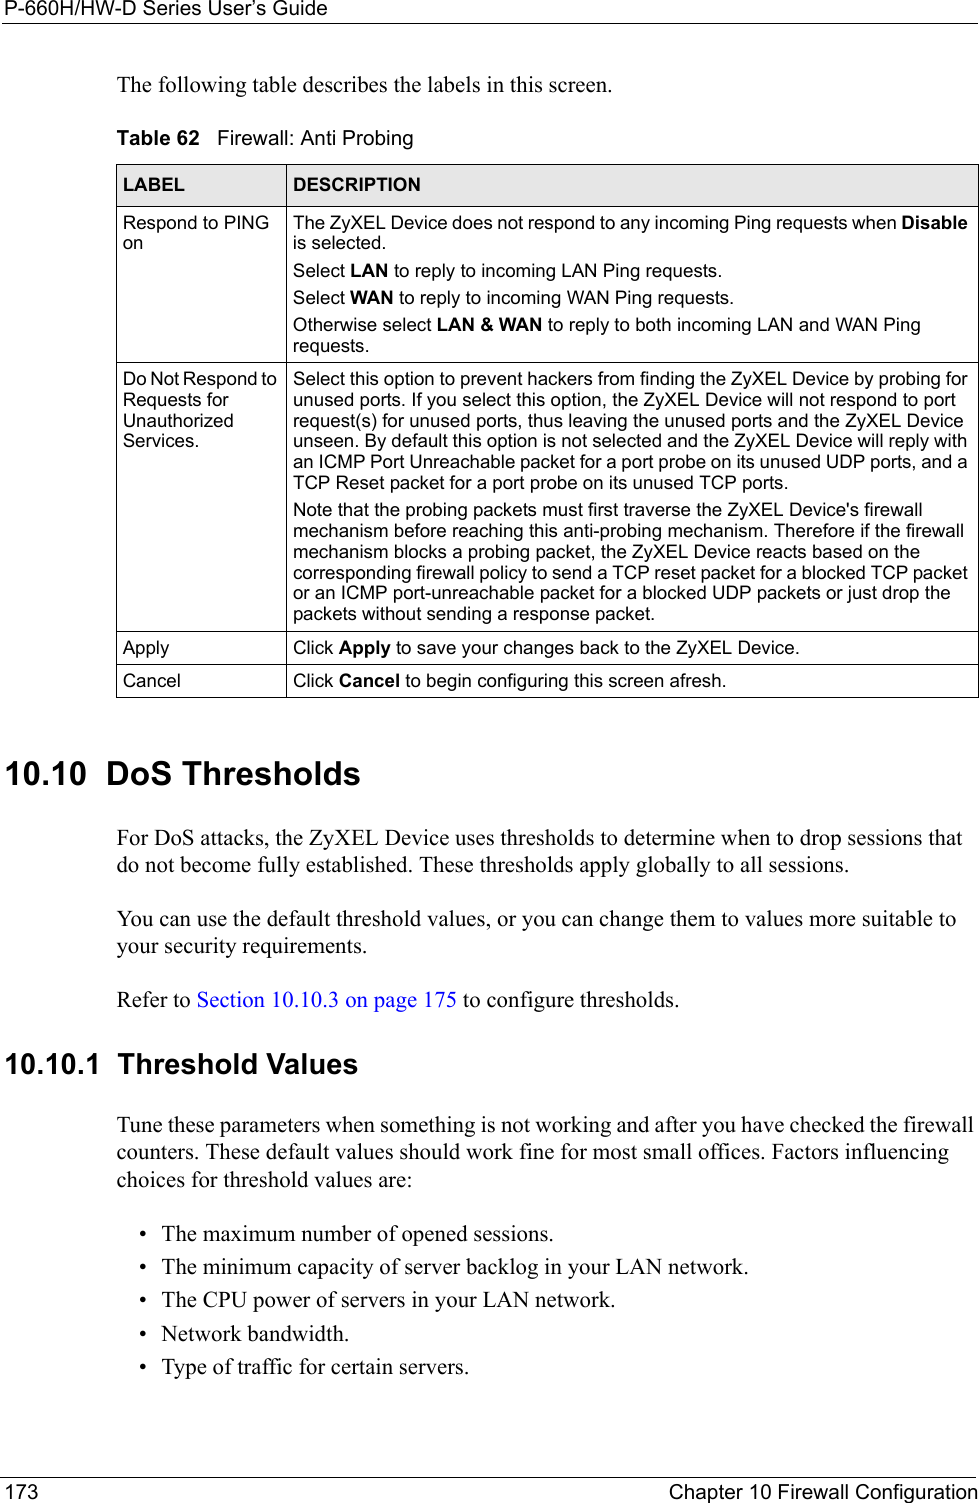 P-660H/HW-D Series User’s Guide173 Chapter 10 Firewall ConfigurationThe following table describes the labels in this screen.10.10  DoS Thresholds For DoS attacks, the ZyXEL Device uses thresholds to determine when to drop sessions that do not become fully established. These thresholds apply globally to all sessions.You can use the default threshold values, or you can change them to values more suitable to your security requirements.Refer to Section 10.10.3 on page 175 to configure thresholds.  10.10.1  Threshold ValuesTune these parameters when something is not working and after you have checked the firewall counters. These default values should work fine for most small offices. Factors influencing choices for threshold values are:• The maximum number of opened sessions.• The minimum capacity of server backlog in your LAN network.• The CPU power of servers in your LAN network.• Network bandwidth. • Type of traffic for certain servers.Table 62   Firewall: Anti ProbingLABEL DESCRIPTIONRespond to PING onThe ZyXEL Device does not respond to any incoming Ping requests when Disable is selected. Select LAN to reply to incoming LAN Ping requests.Select WAN to reply to incoming WAN Ping requests. Otherwise select LAN &amp; WAN to reply to both incoming LAN and WAN Ping requests. Do Not Respond to Requests for Unauthorized Services.Select this option to prevent hackers from finding the ZyXEL Device by probing for unused ports. If you select this option, the ZyXEL Device will not respond to port request(s) for unused ports, thus leaving the unused ports and the ZyXEL Device unseen. By default this option is not selected and the ZyXEL Device will reply with an ICMP Port Unreachable packet for a port probe on its unused UDP ports, and a TCP Reset packet for a port probe on its unused TCP ports. Note that the probing packets must first traverse the ZyXEL Device&apos;s firewall mechanism before reaching this anti-probing mechanism. Therefore if the firewall mechanism blocks a probing packet, the ZyXEL Device reacts based on the corresponding firewall policy to send a TCP reset packet for a blocked TCP packet or an ICMP port-unreachable packet for a blocked UDP packets or just drop the packets without sending a response packet.Apply Click Apply to save your changes back to the ZyXEL Device.Cancel Click Cancel to begin configuring this screen afresh.